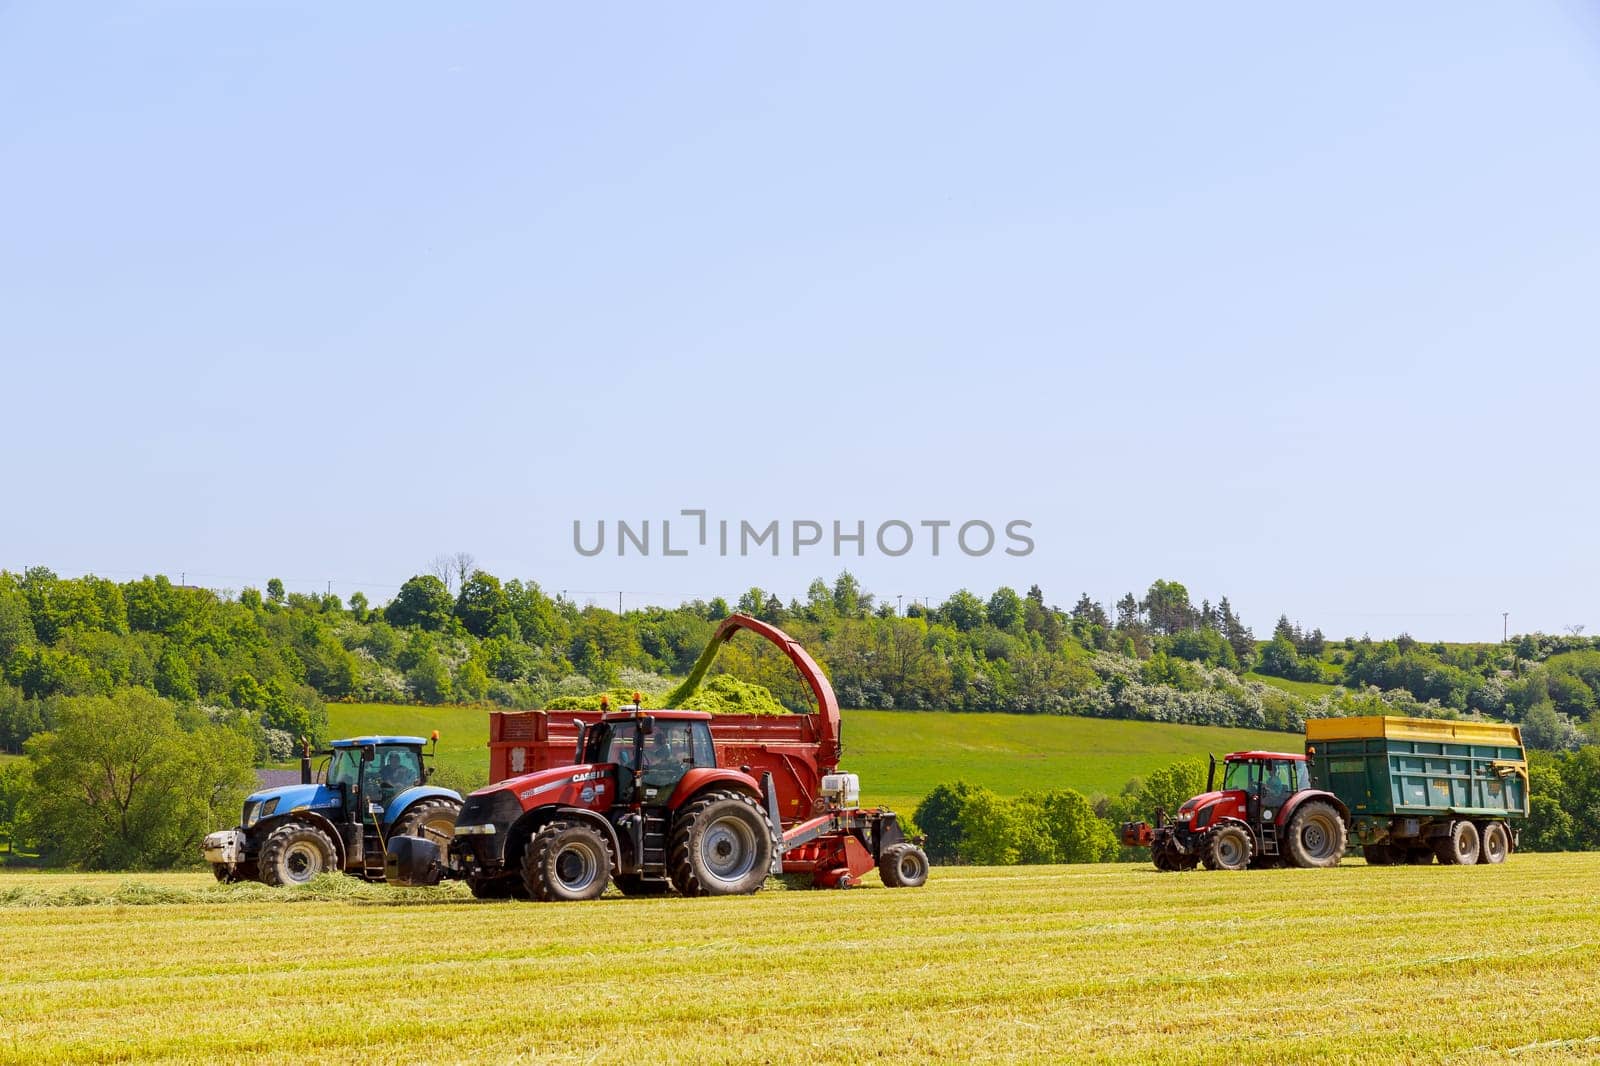 Skutech, Czech Republic, 13 June 2021: Forage harvester, cuts silage in the field and fills the tractor trailer. by Yaroslav